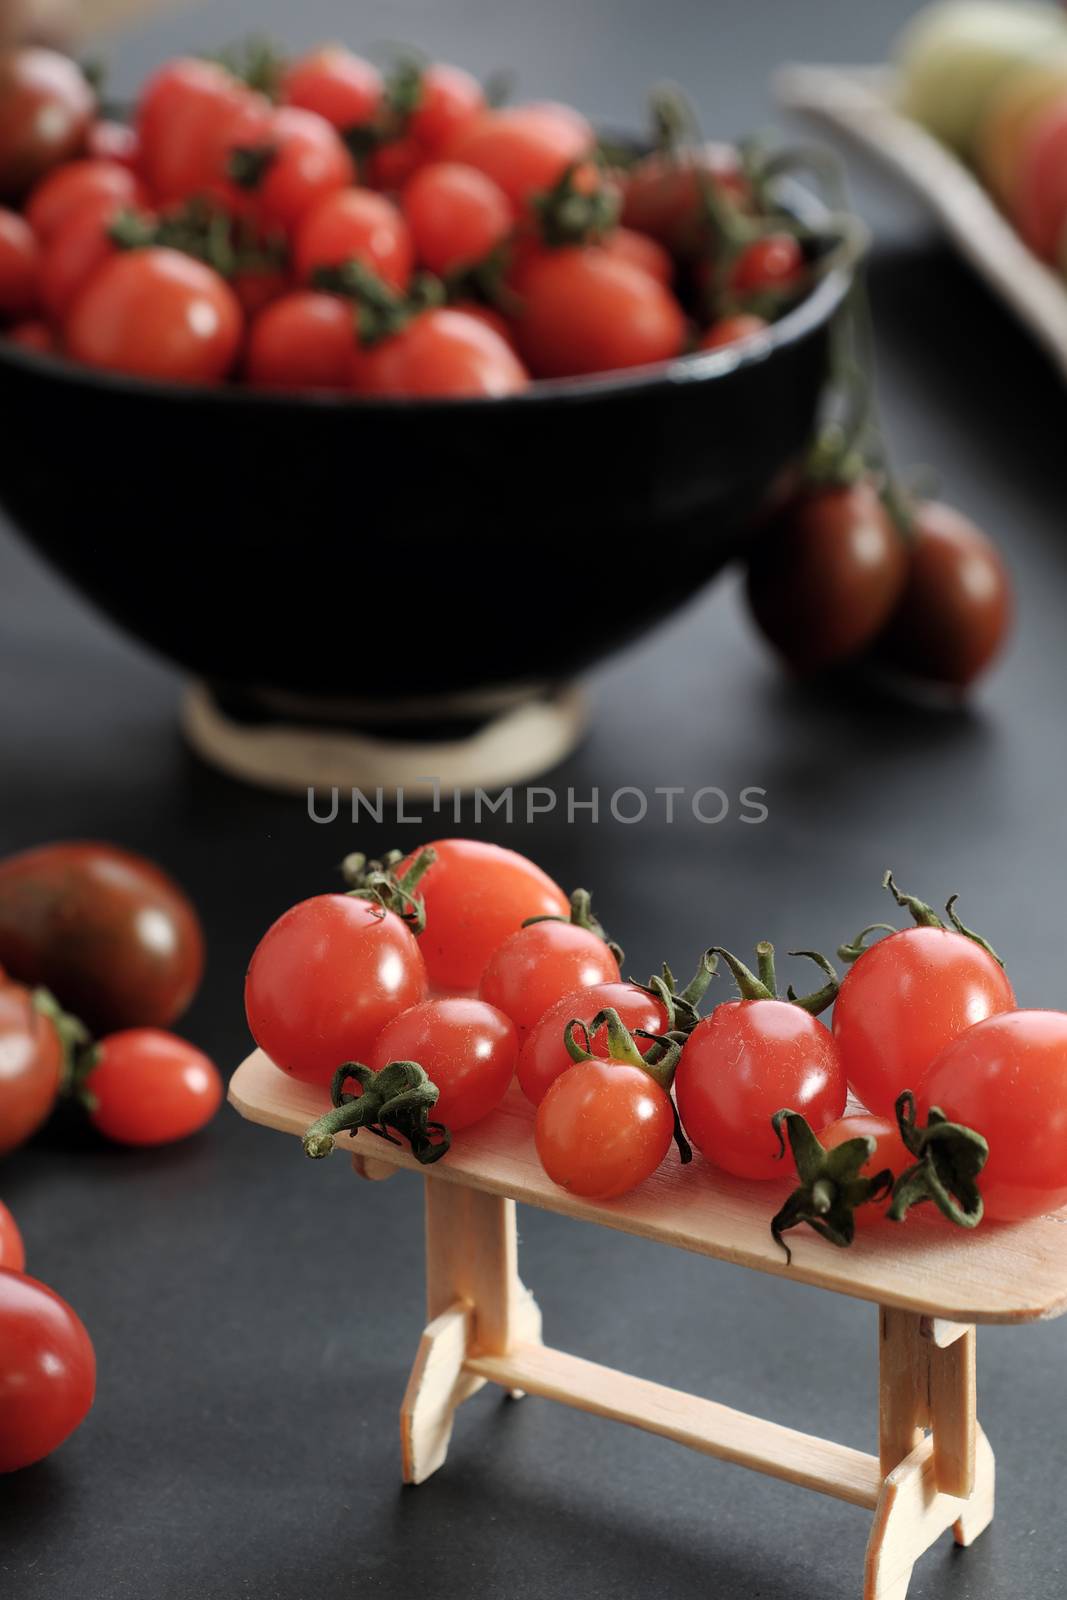 Collect of tomatoes, cheap food anticancer by xuanhuongho